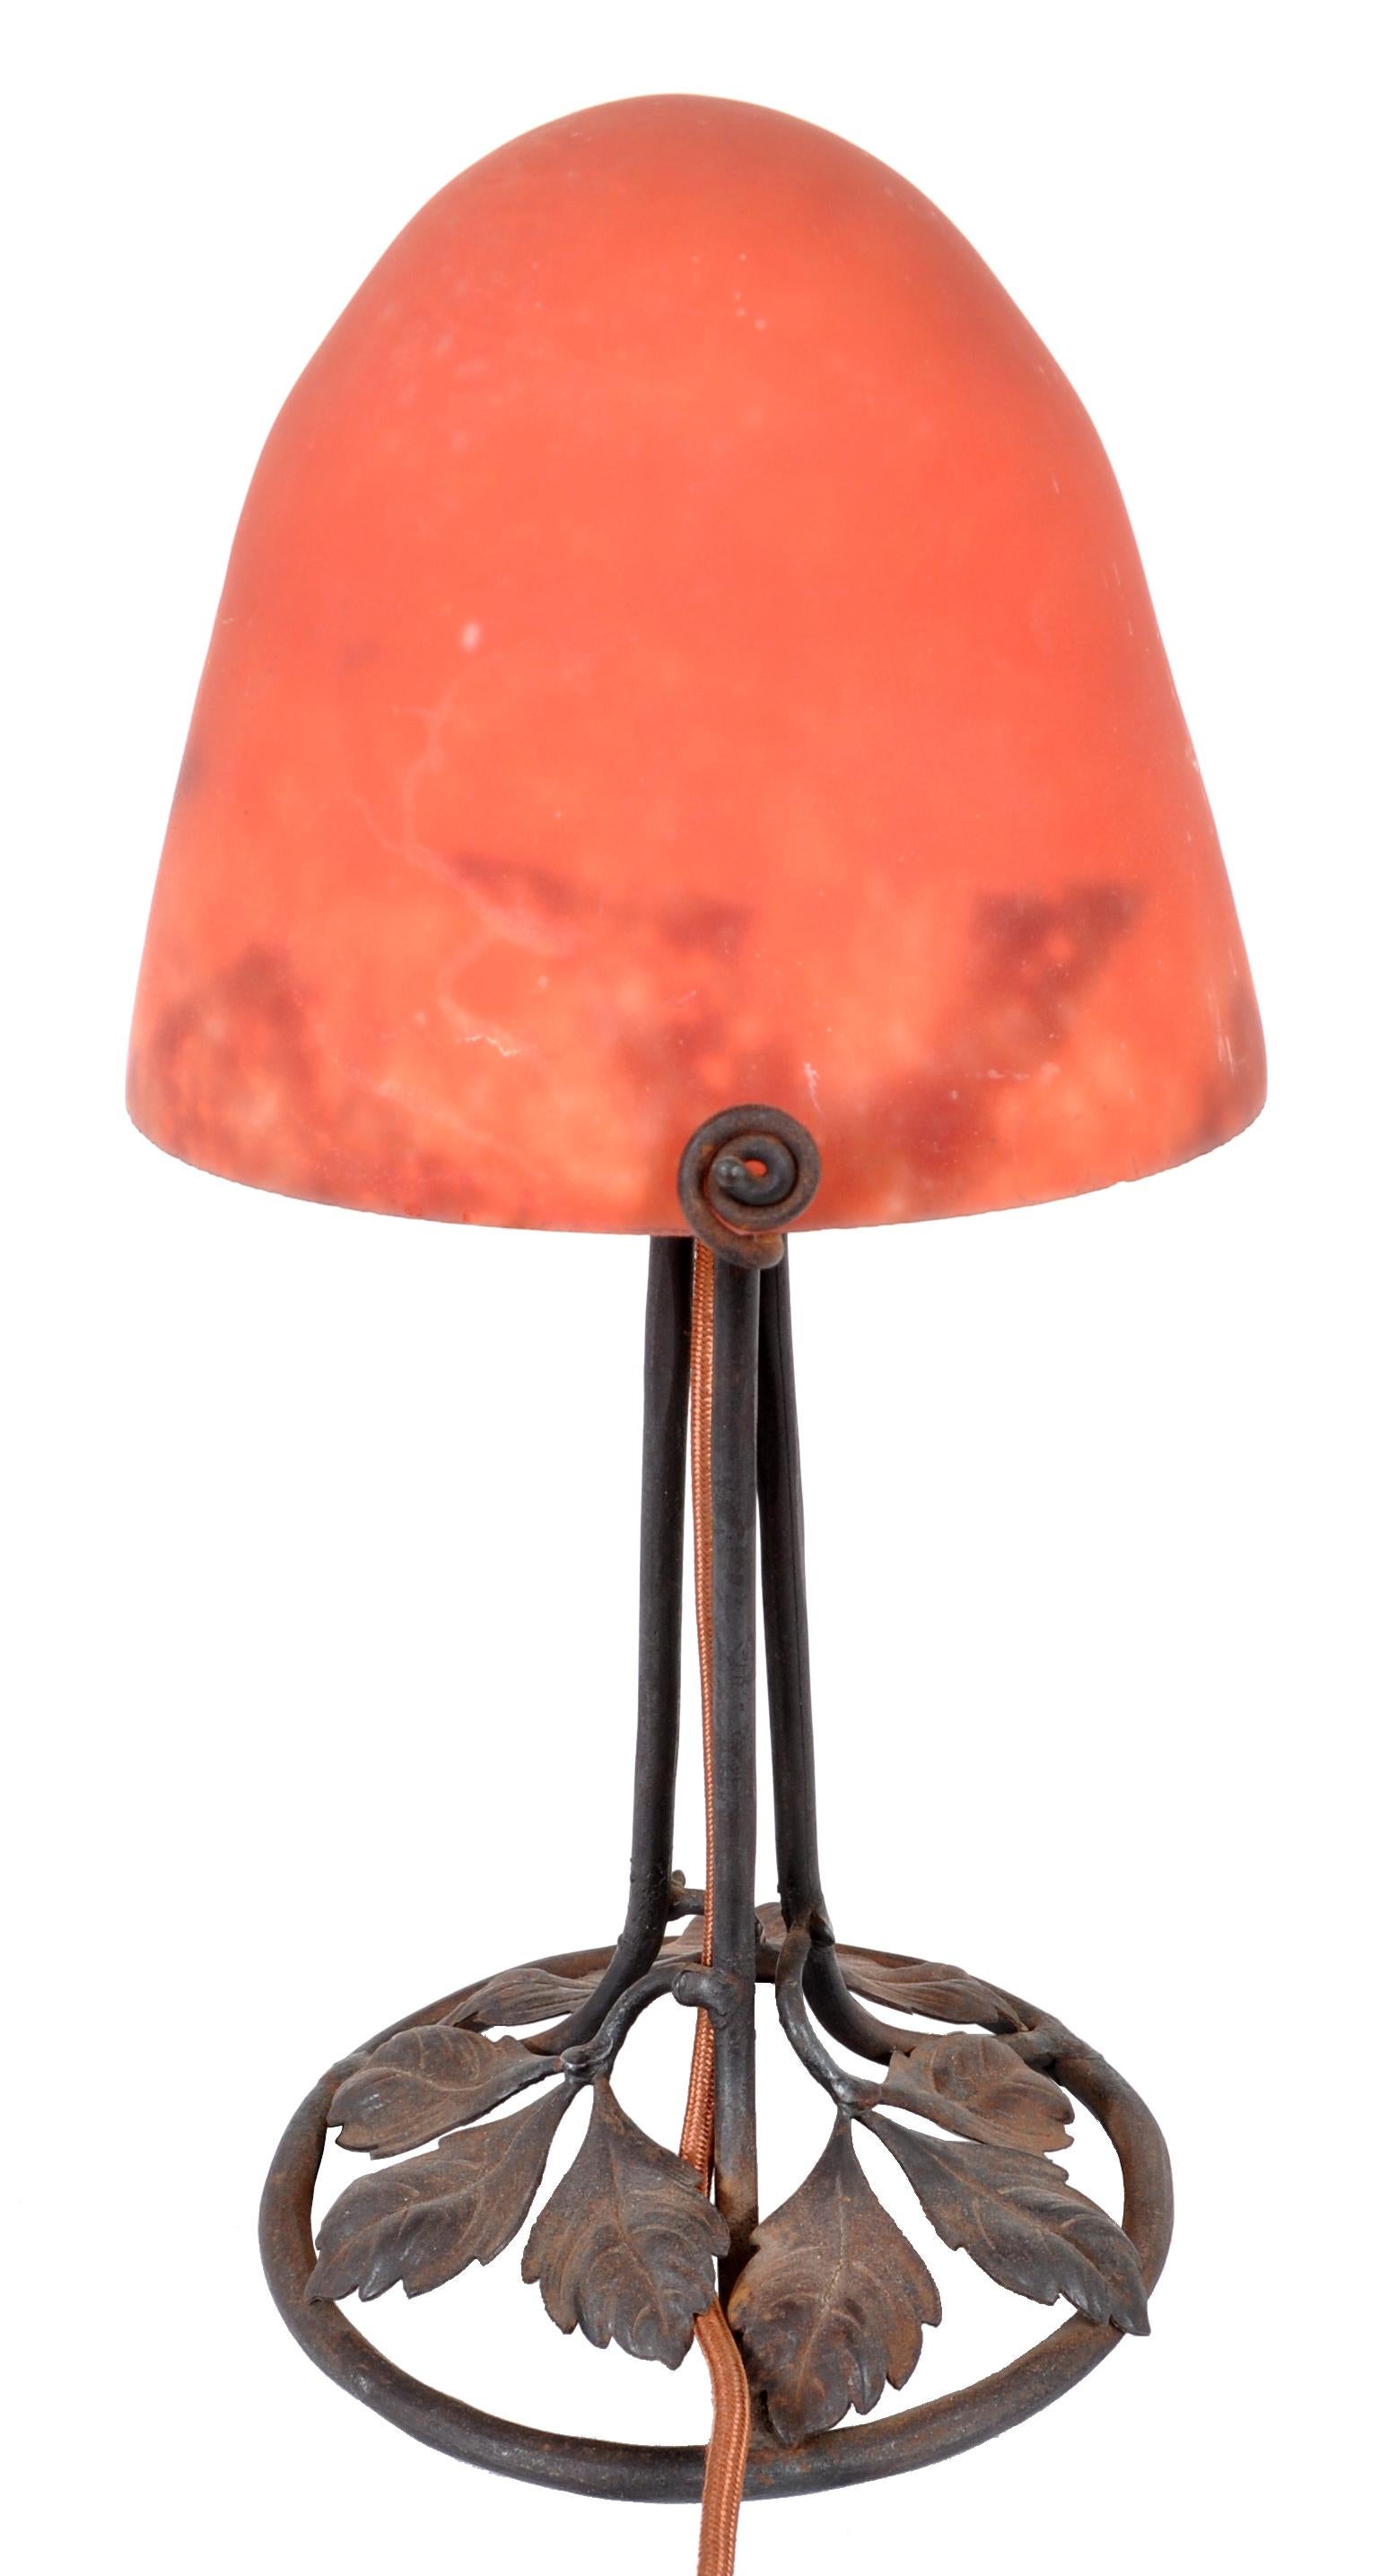 Hand-Crafted Antique French Art Deco 'Mushroom' Edgar Brandt Wrought Iron Daum Table Lamp